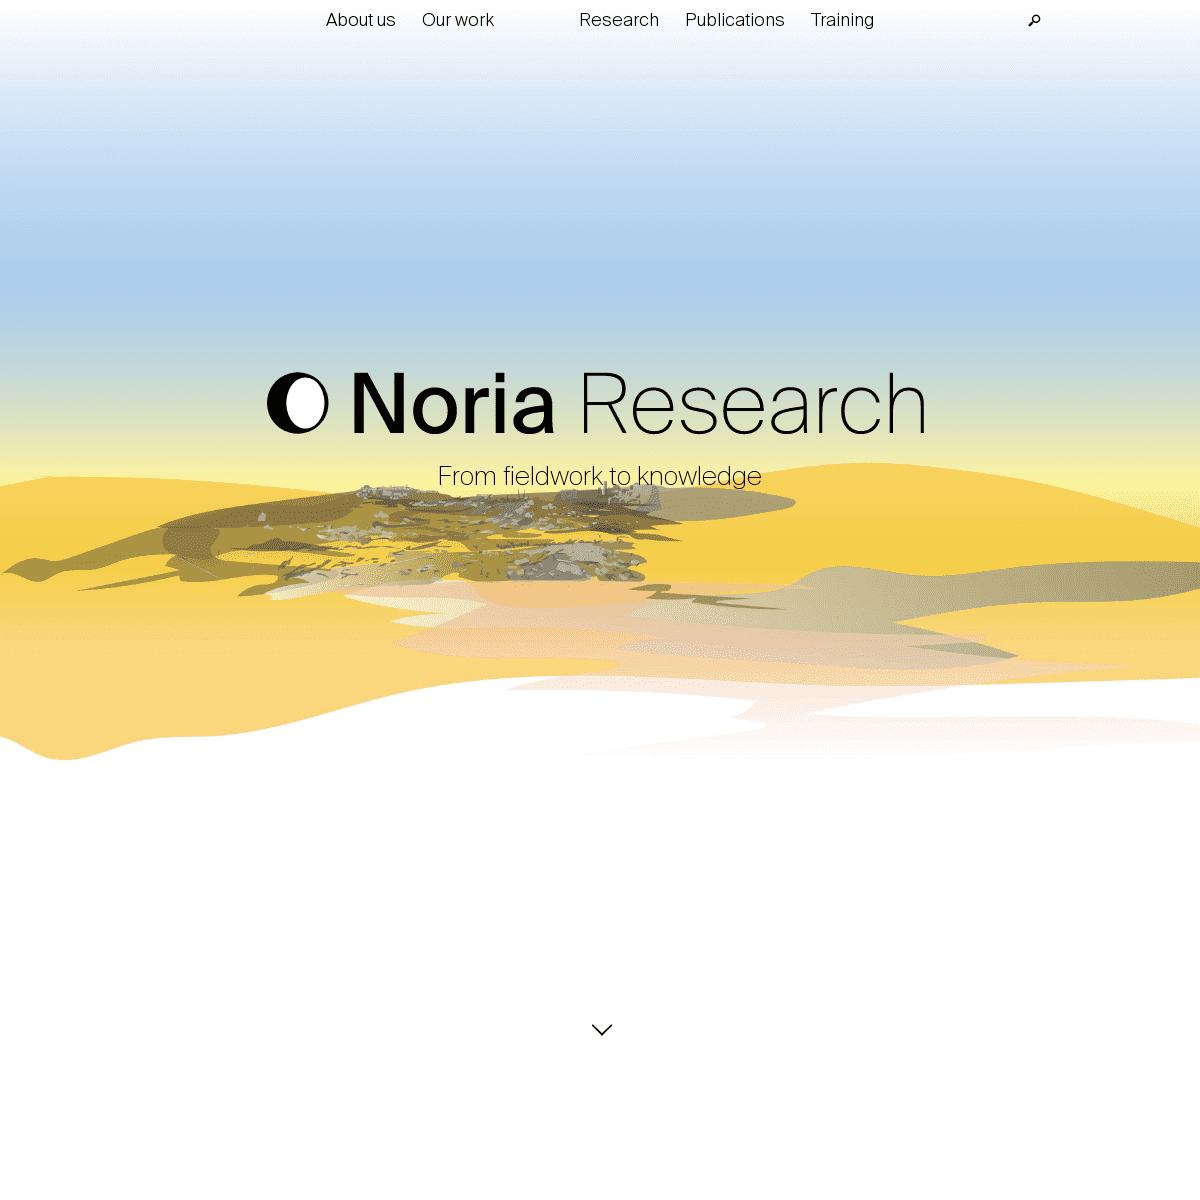 A complete backup of https://noria-research.com